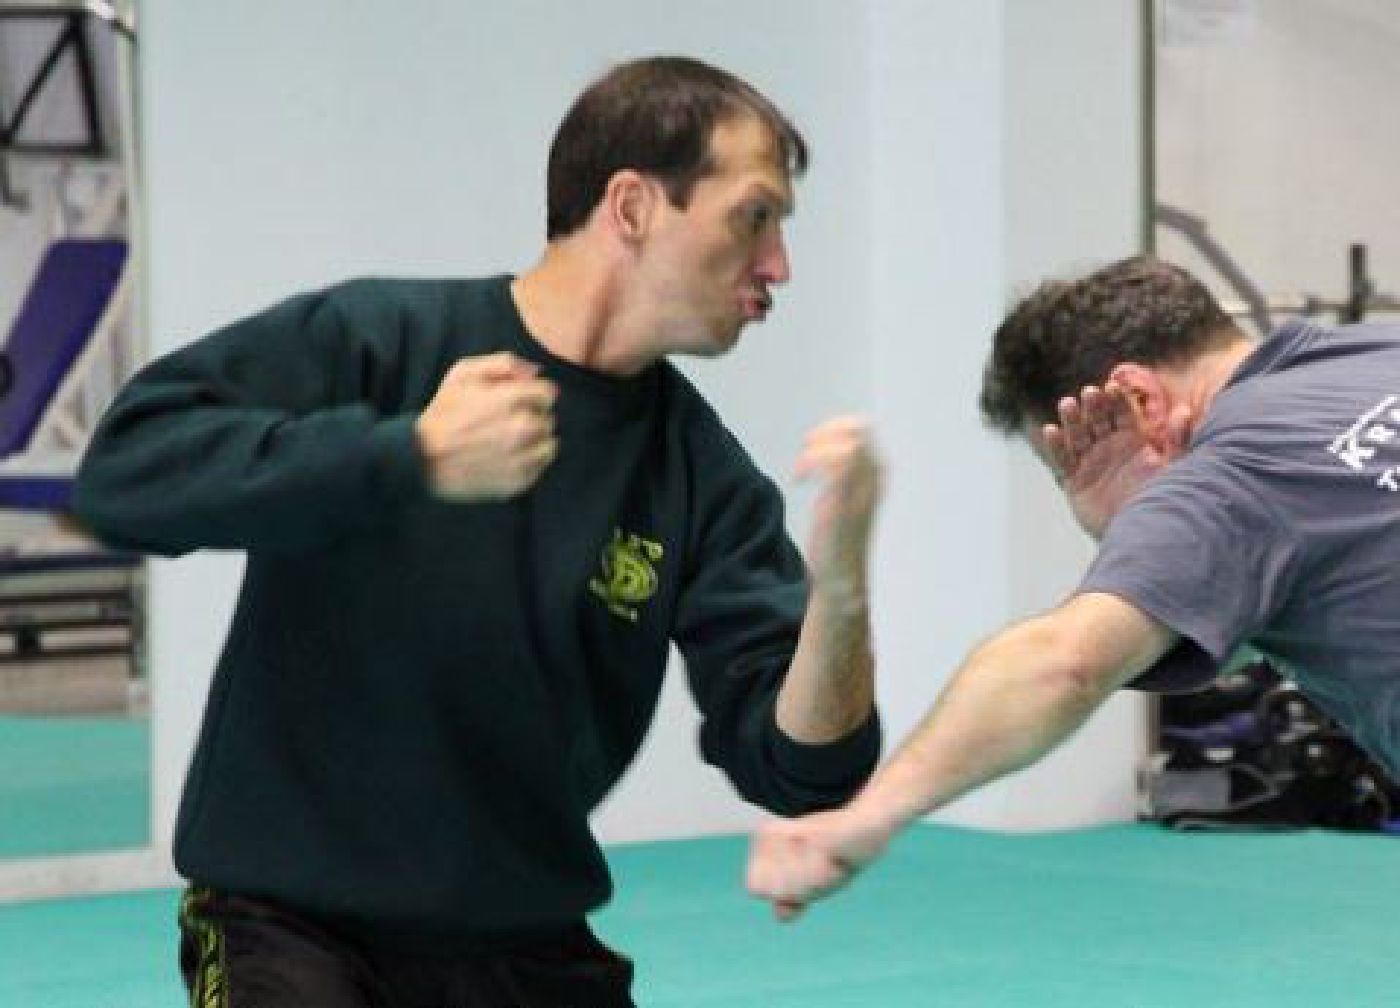 Krav Maga Instructor demonstrating how to deflect an attacker's punch to counter